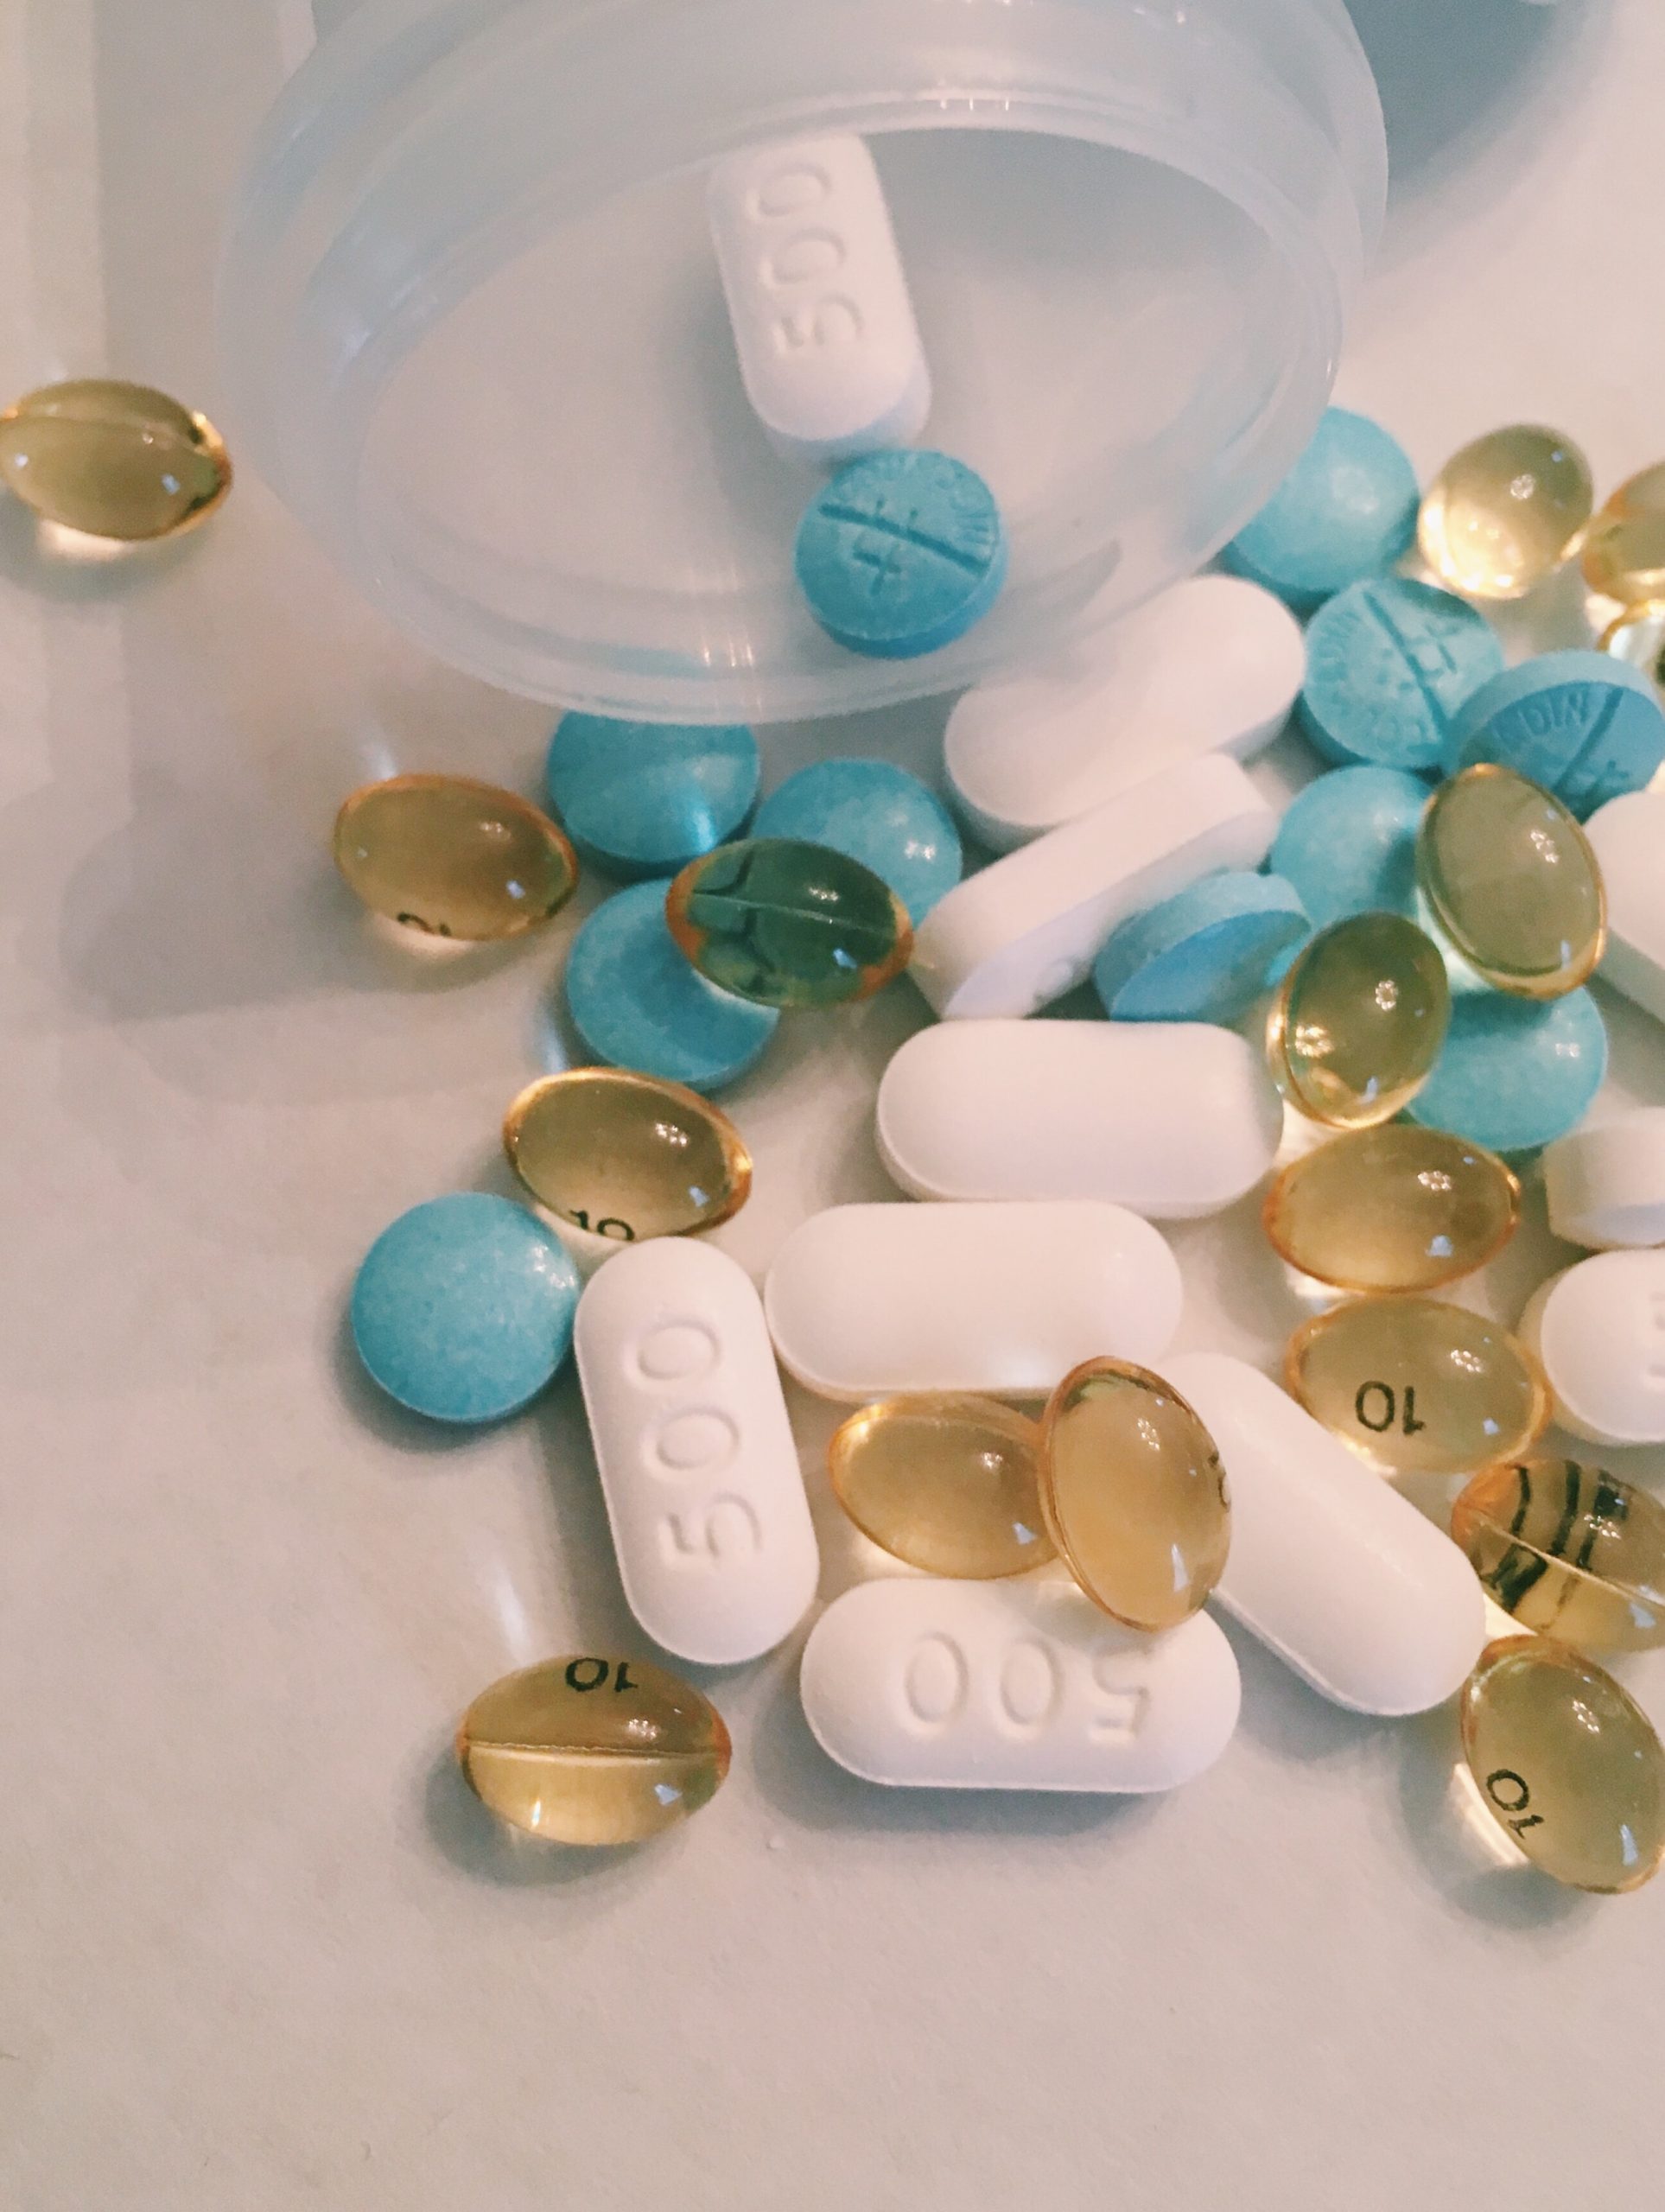 Blue, white and clear pills. Photo by pina messina on Unsplash